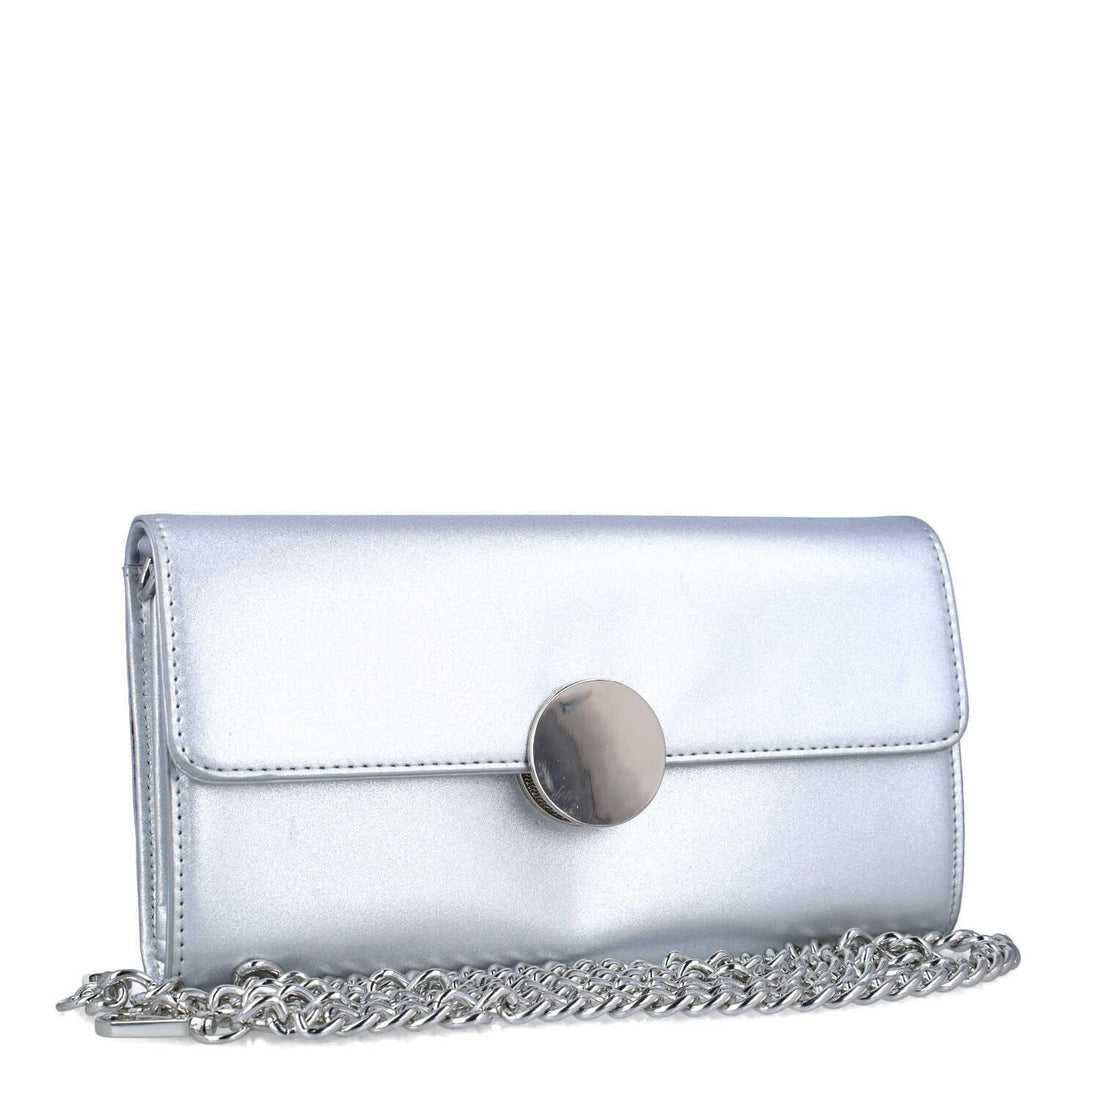 Silver Clutch Bag With Chain Strap_85712_09_02